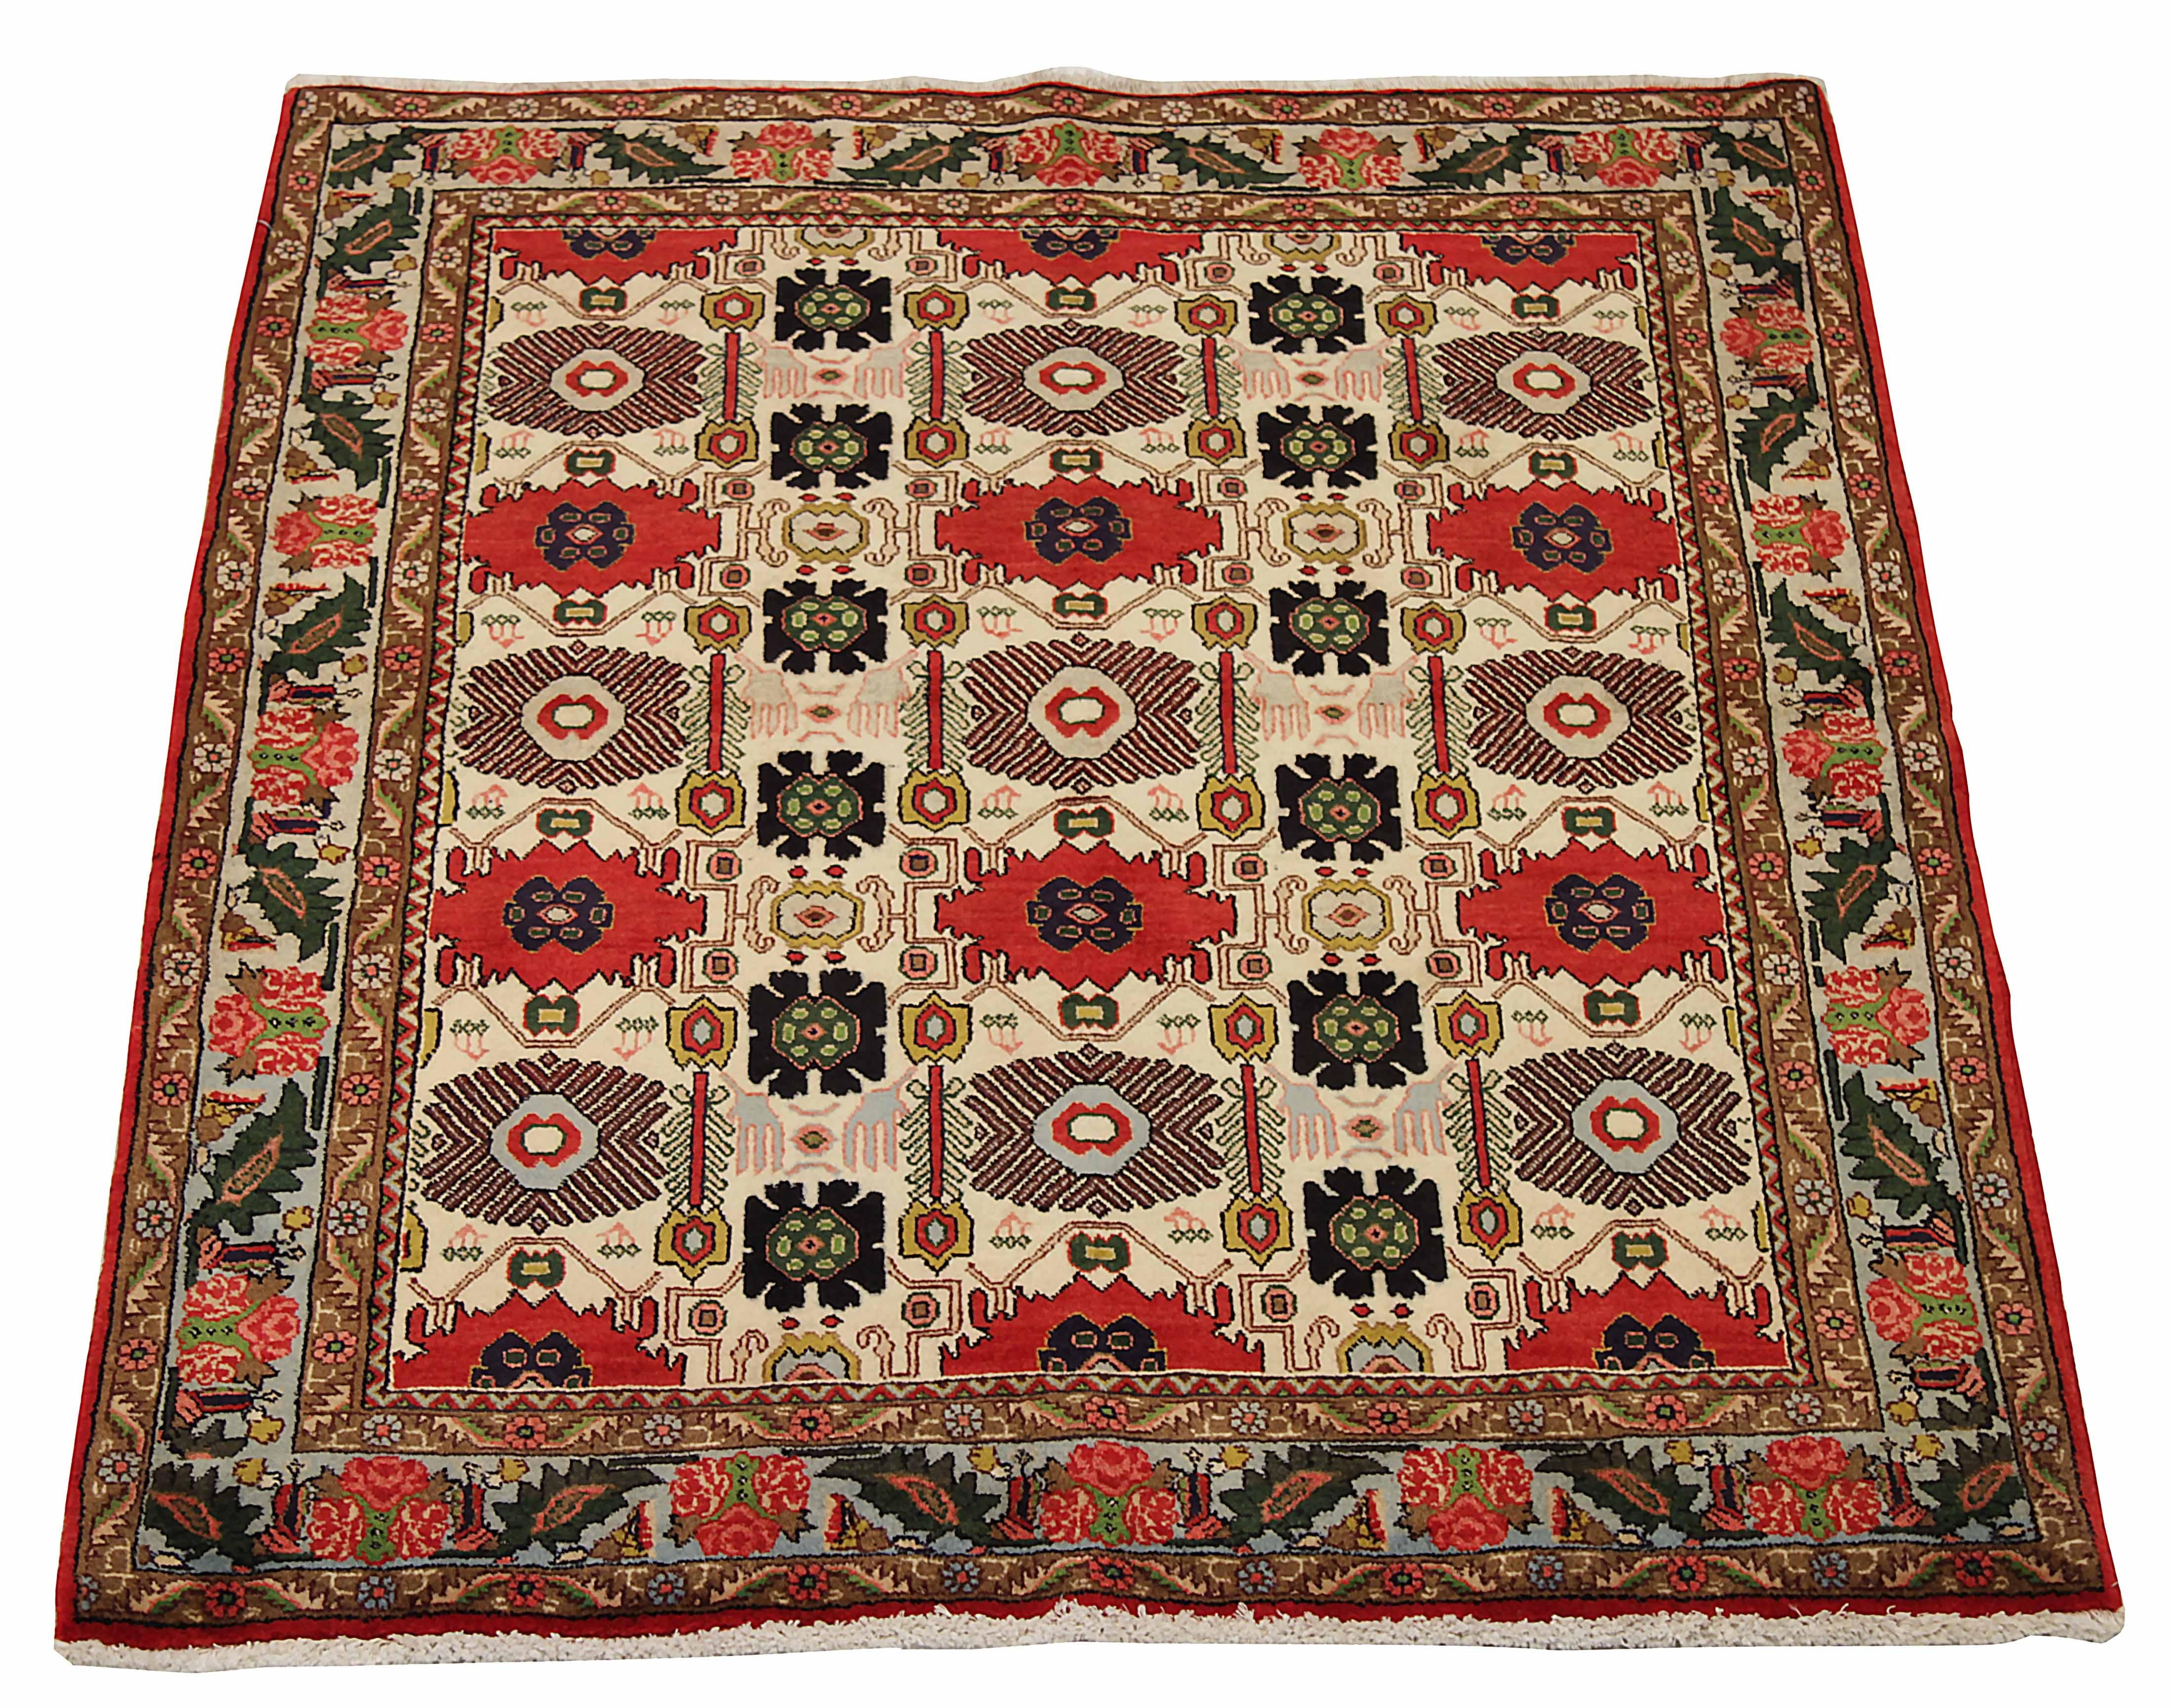 This vintage Persian area rug is an exquisite handwoven piece made from the finest sheep's wool and colored using only safe, all-natural vegetable dyes. Featuring a classic Sarouk design, expert artisans have crafted this beautiful rug with skill